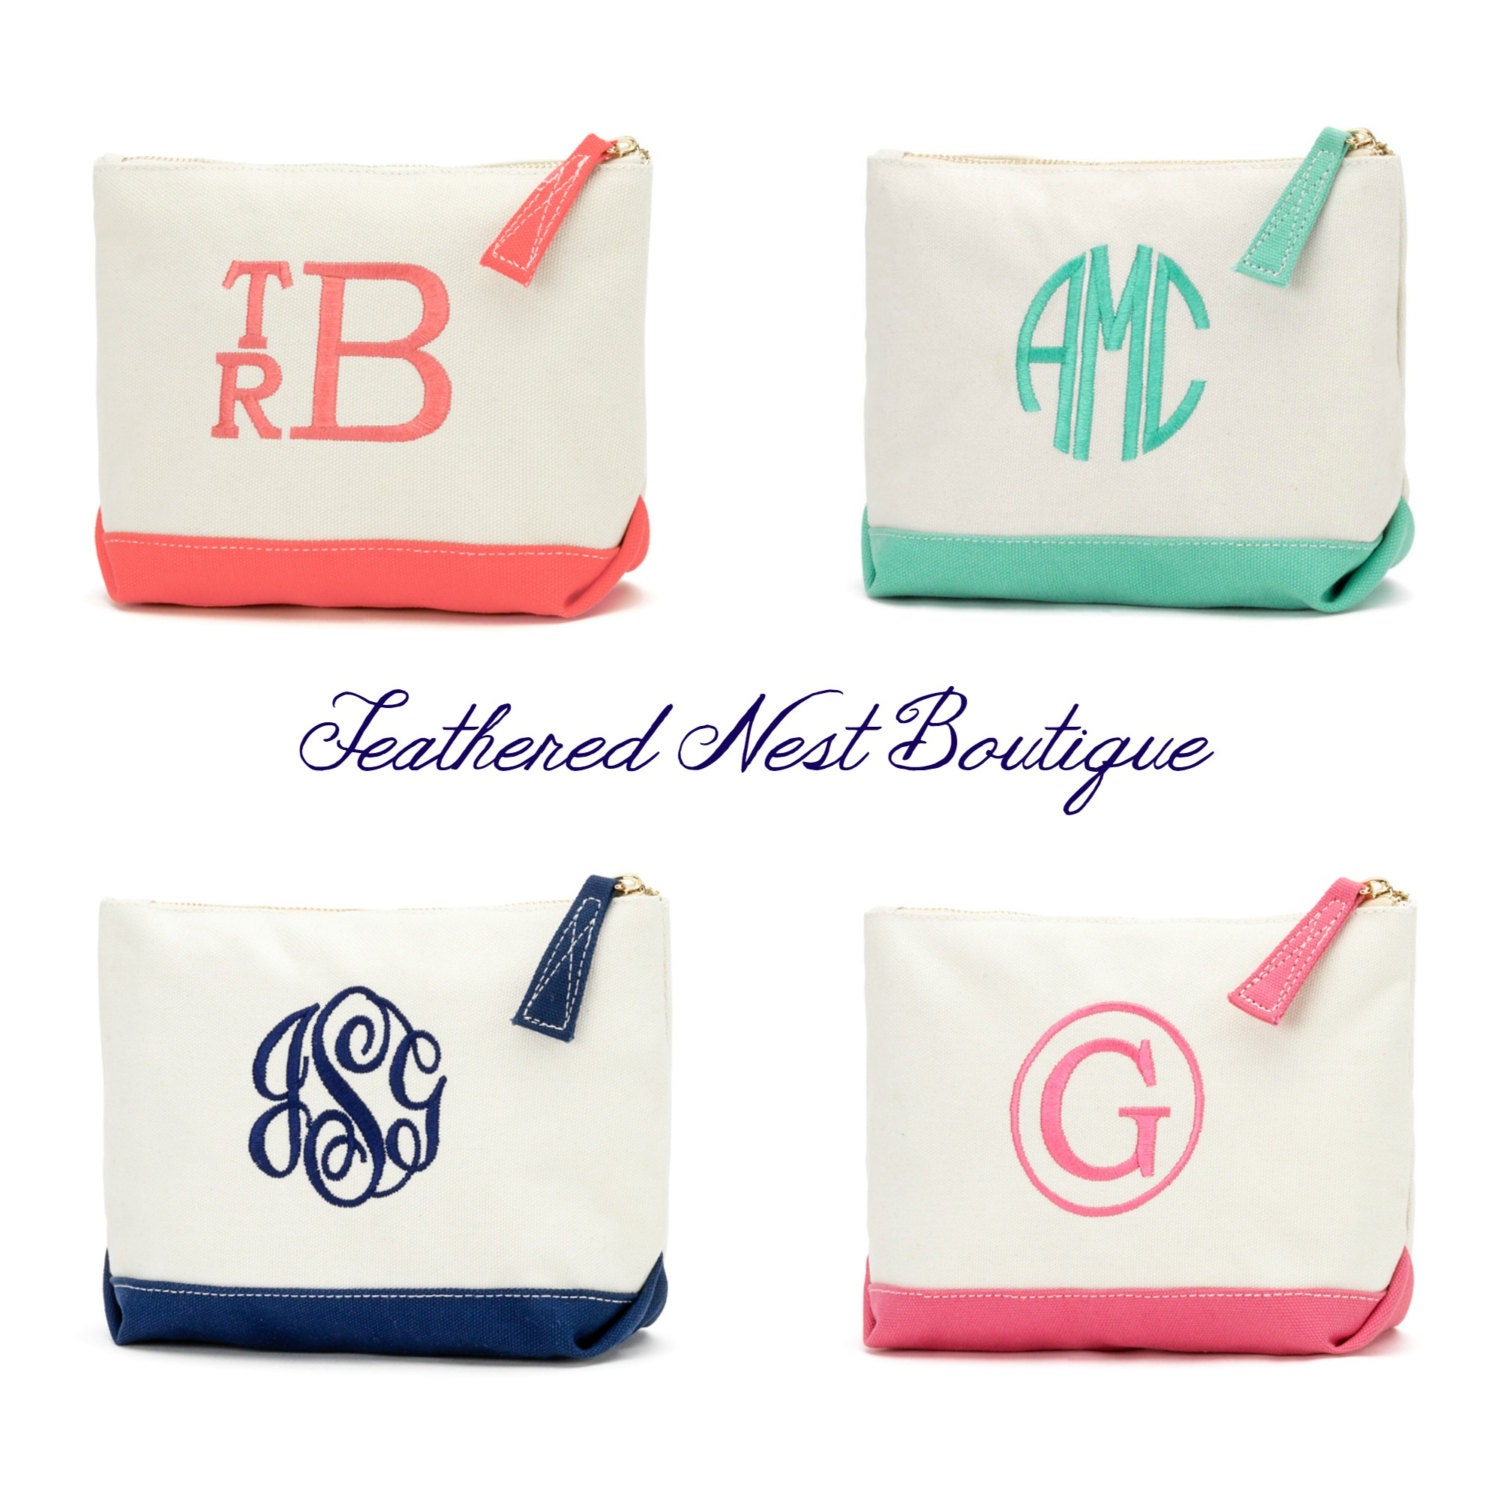 Monogrammed Canvas Makeup Bag / Cosmetic by FeatherNestBoutique